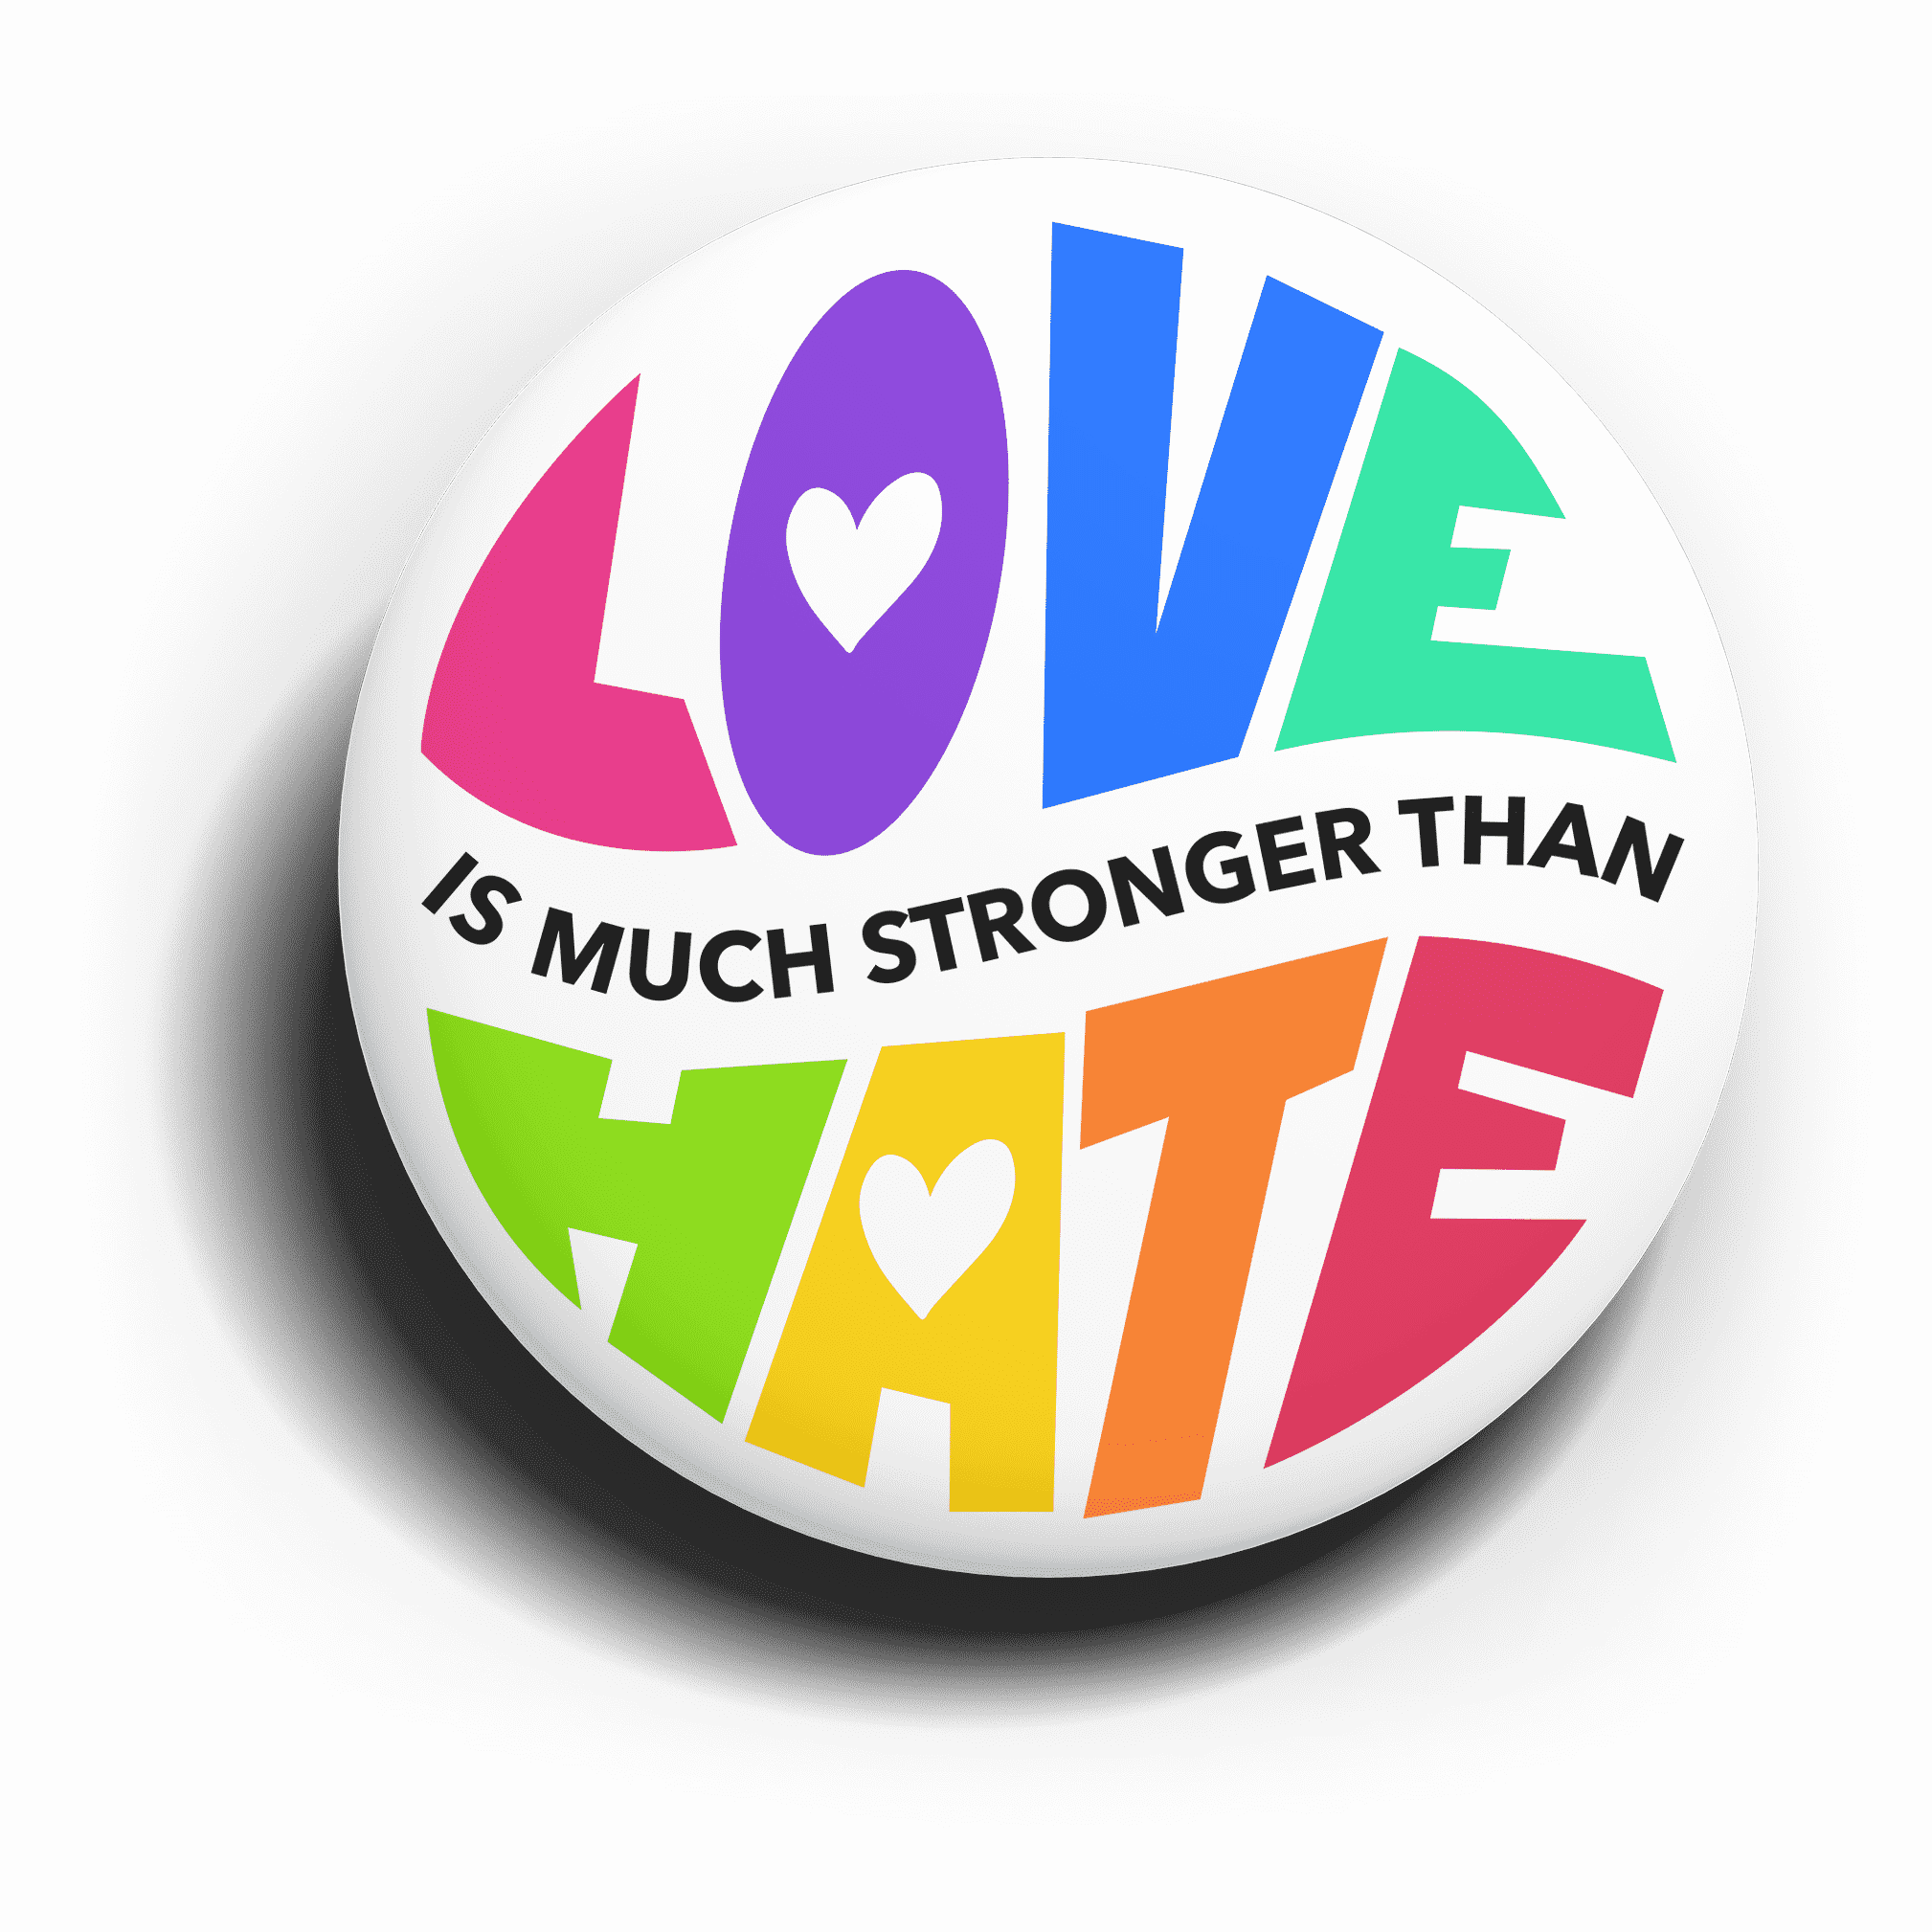 (Pride) Love is Much Stronger Than Hate